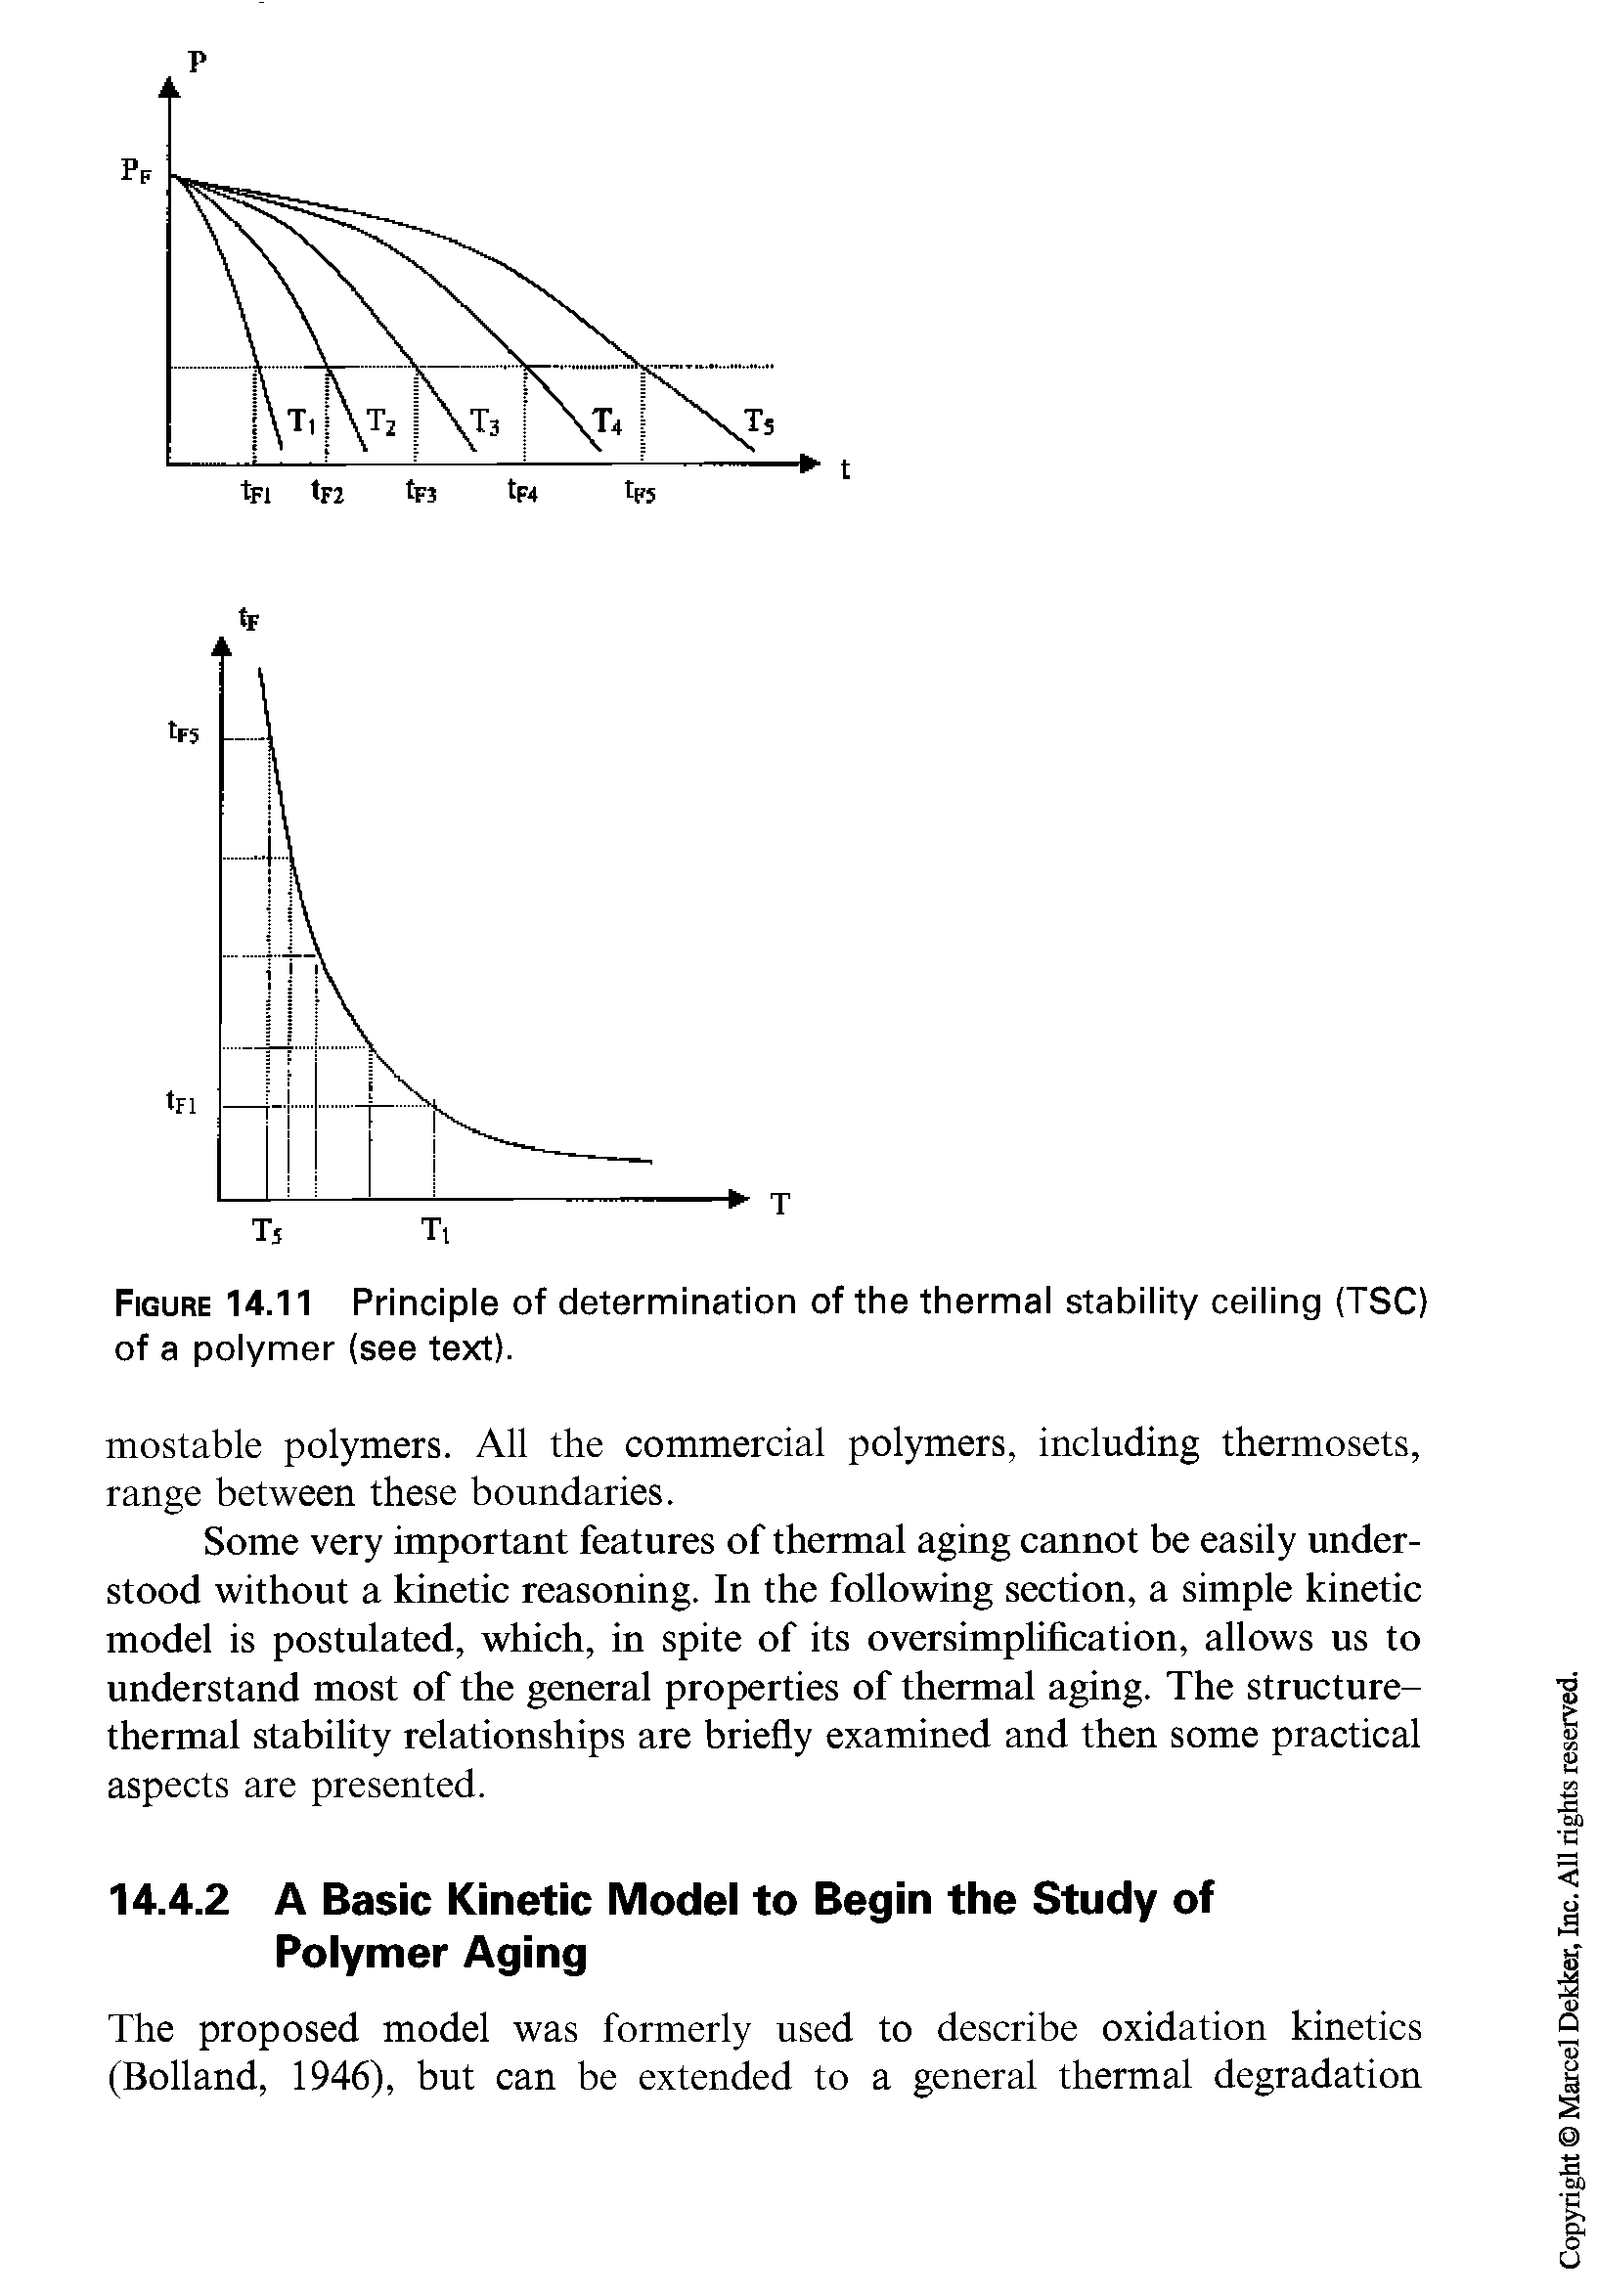 Figure 14.11 Principle of determination of the thermal stability ceiling (TSC) of a polymer (see text).